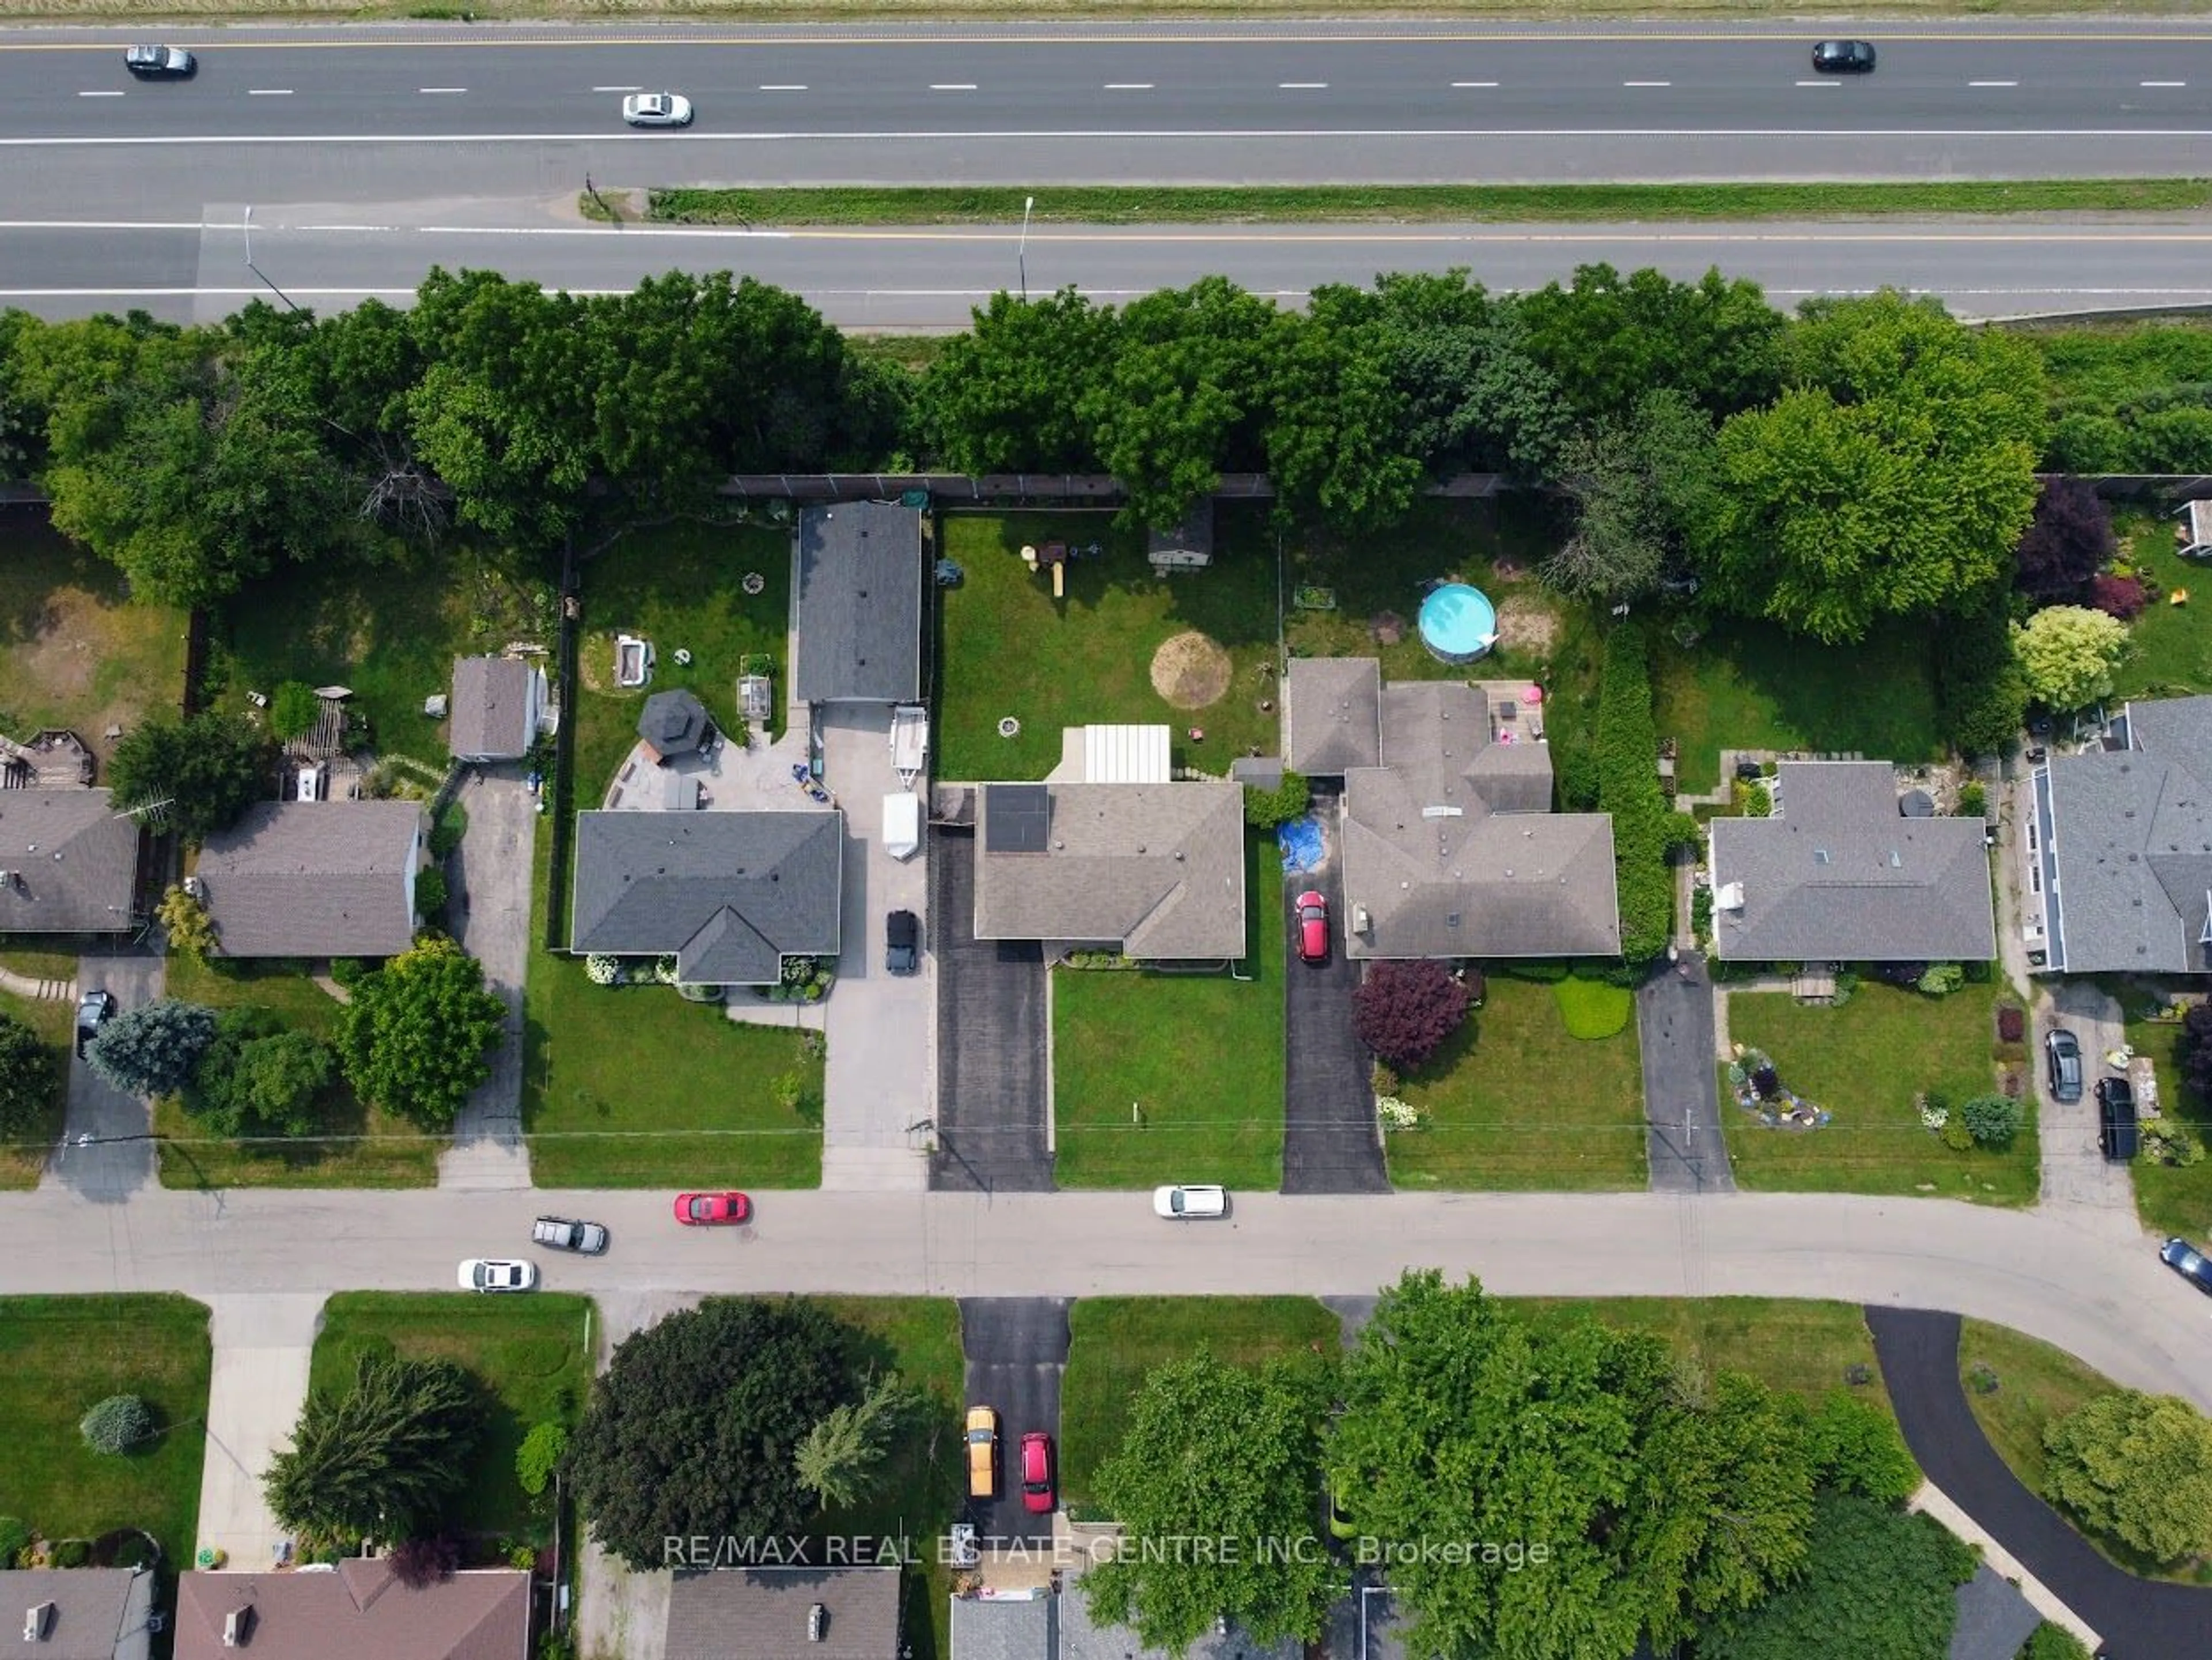 Frontside or backside of a home for 26 Hatton Dr, Hamilton Ontario L9G 2H6